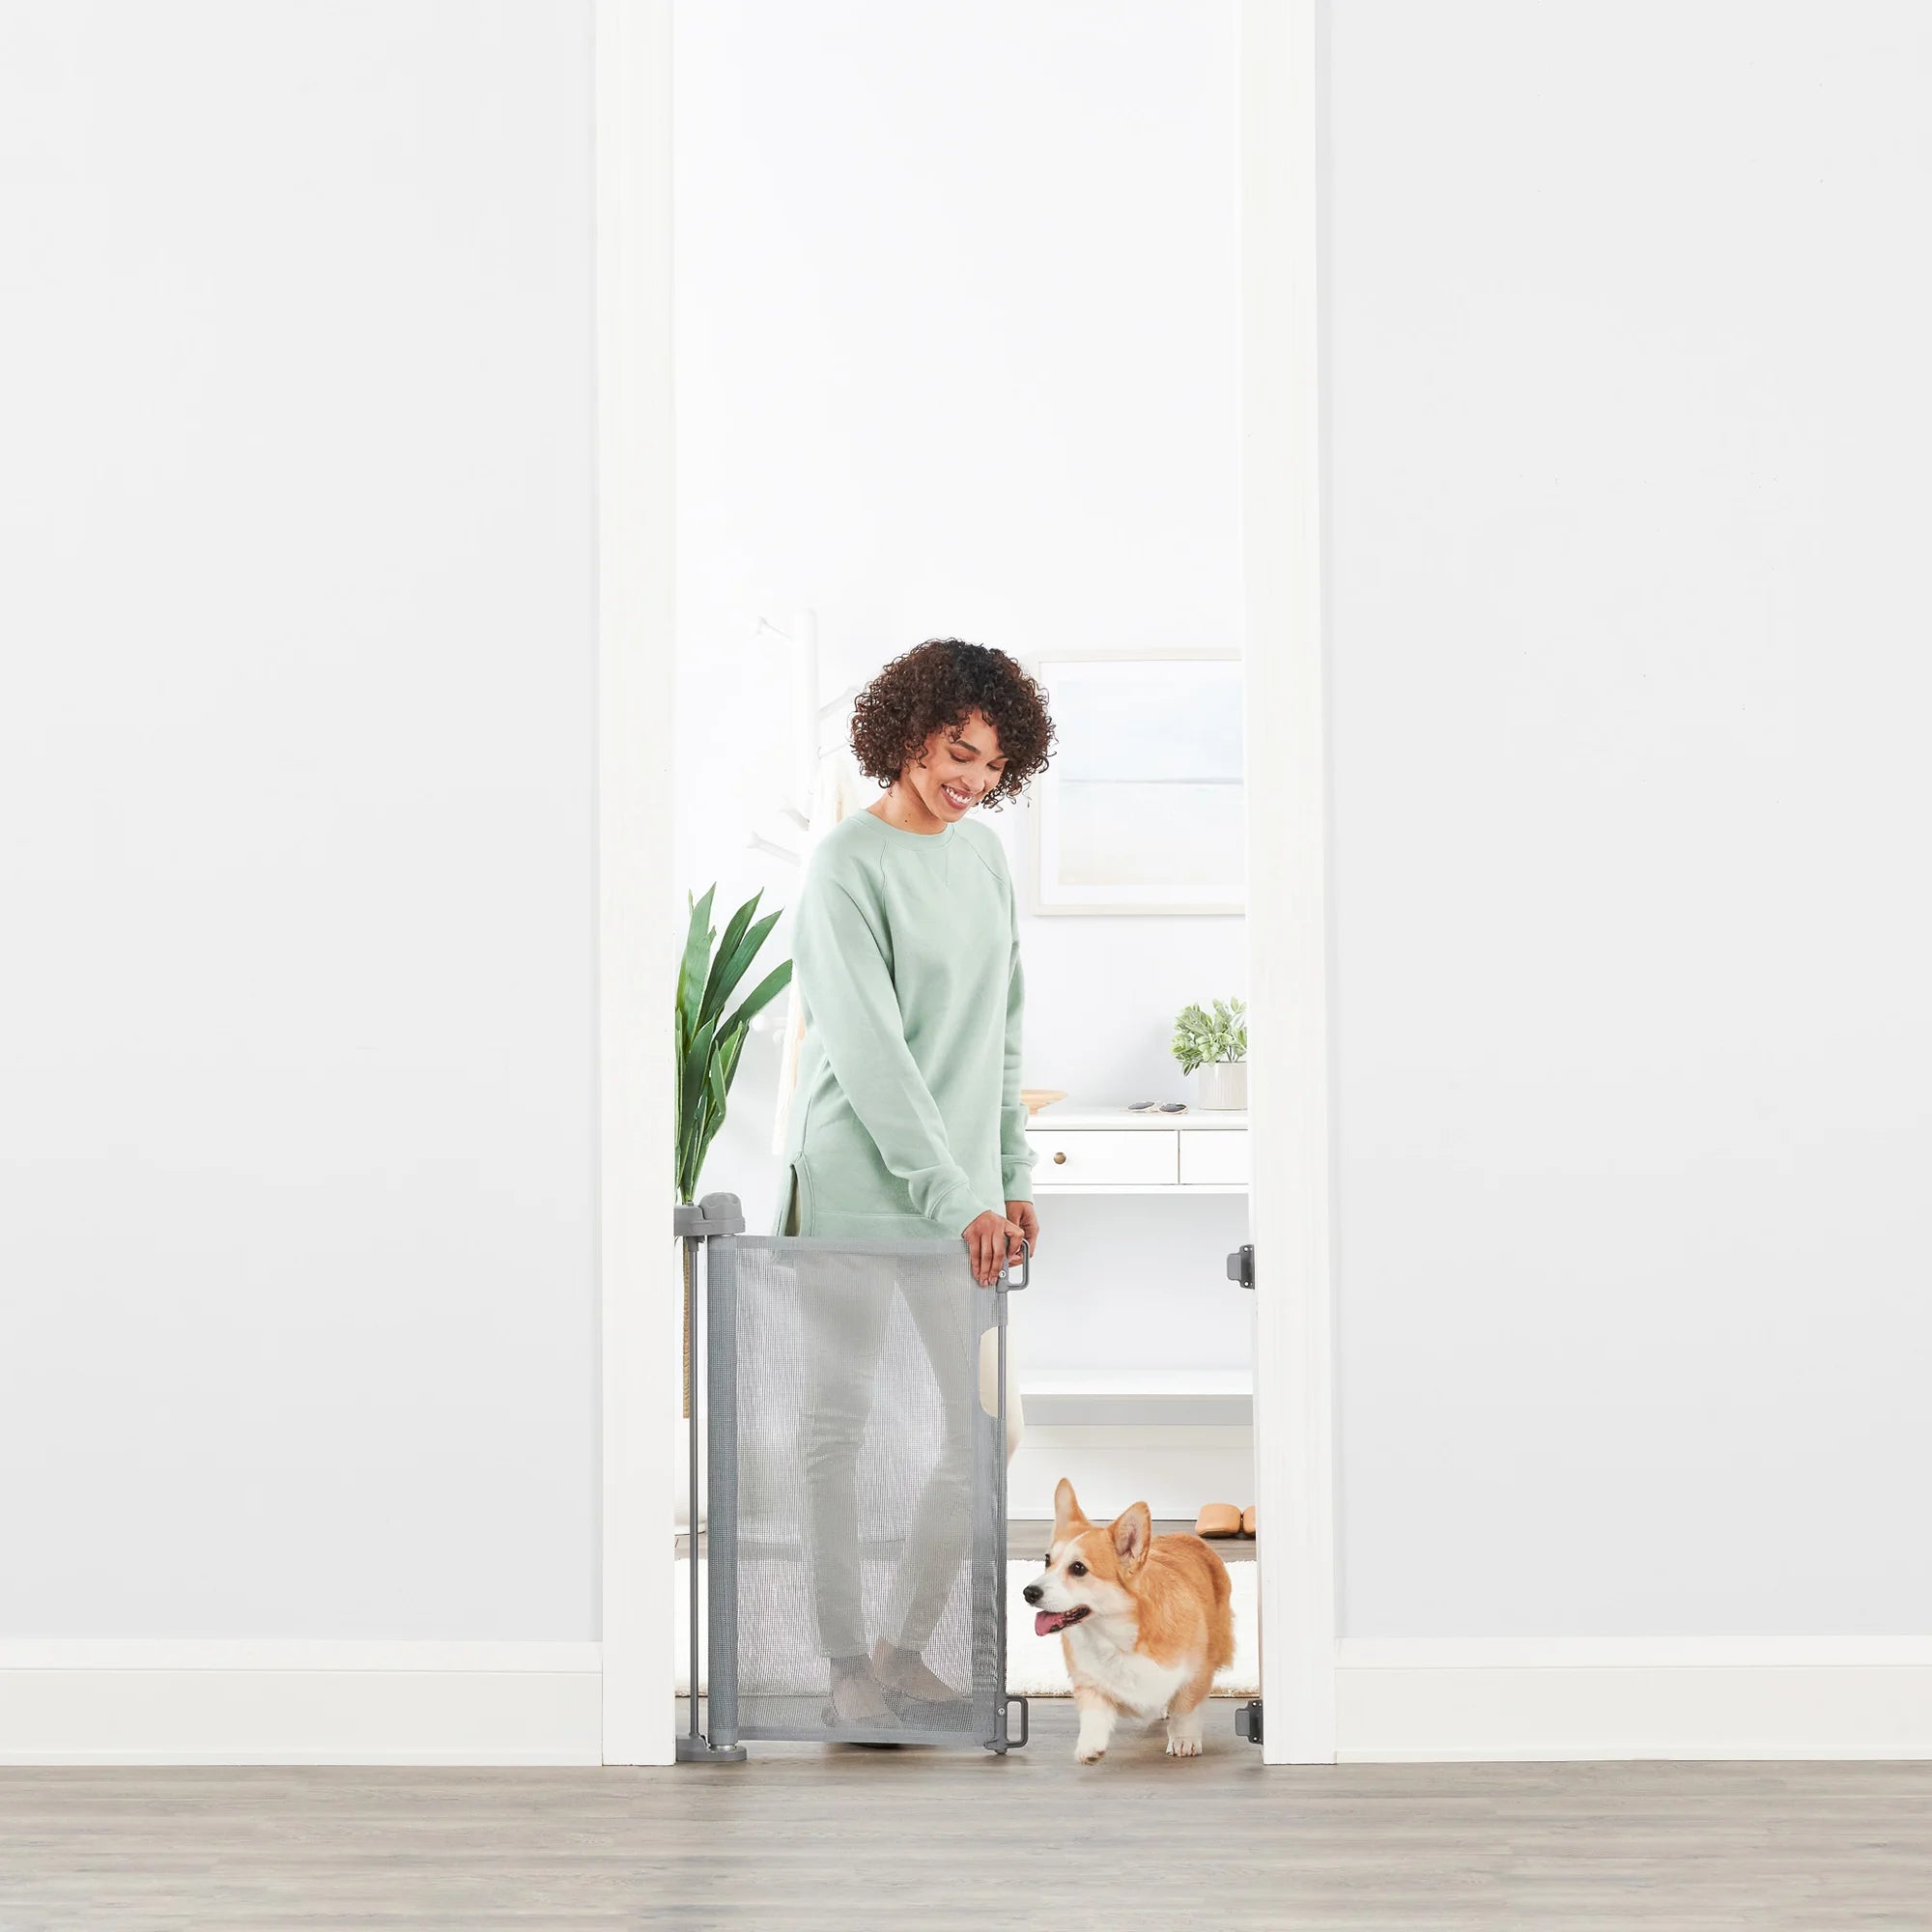 Woman opening Retractable Pet Gate for small dog.